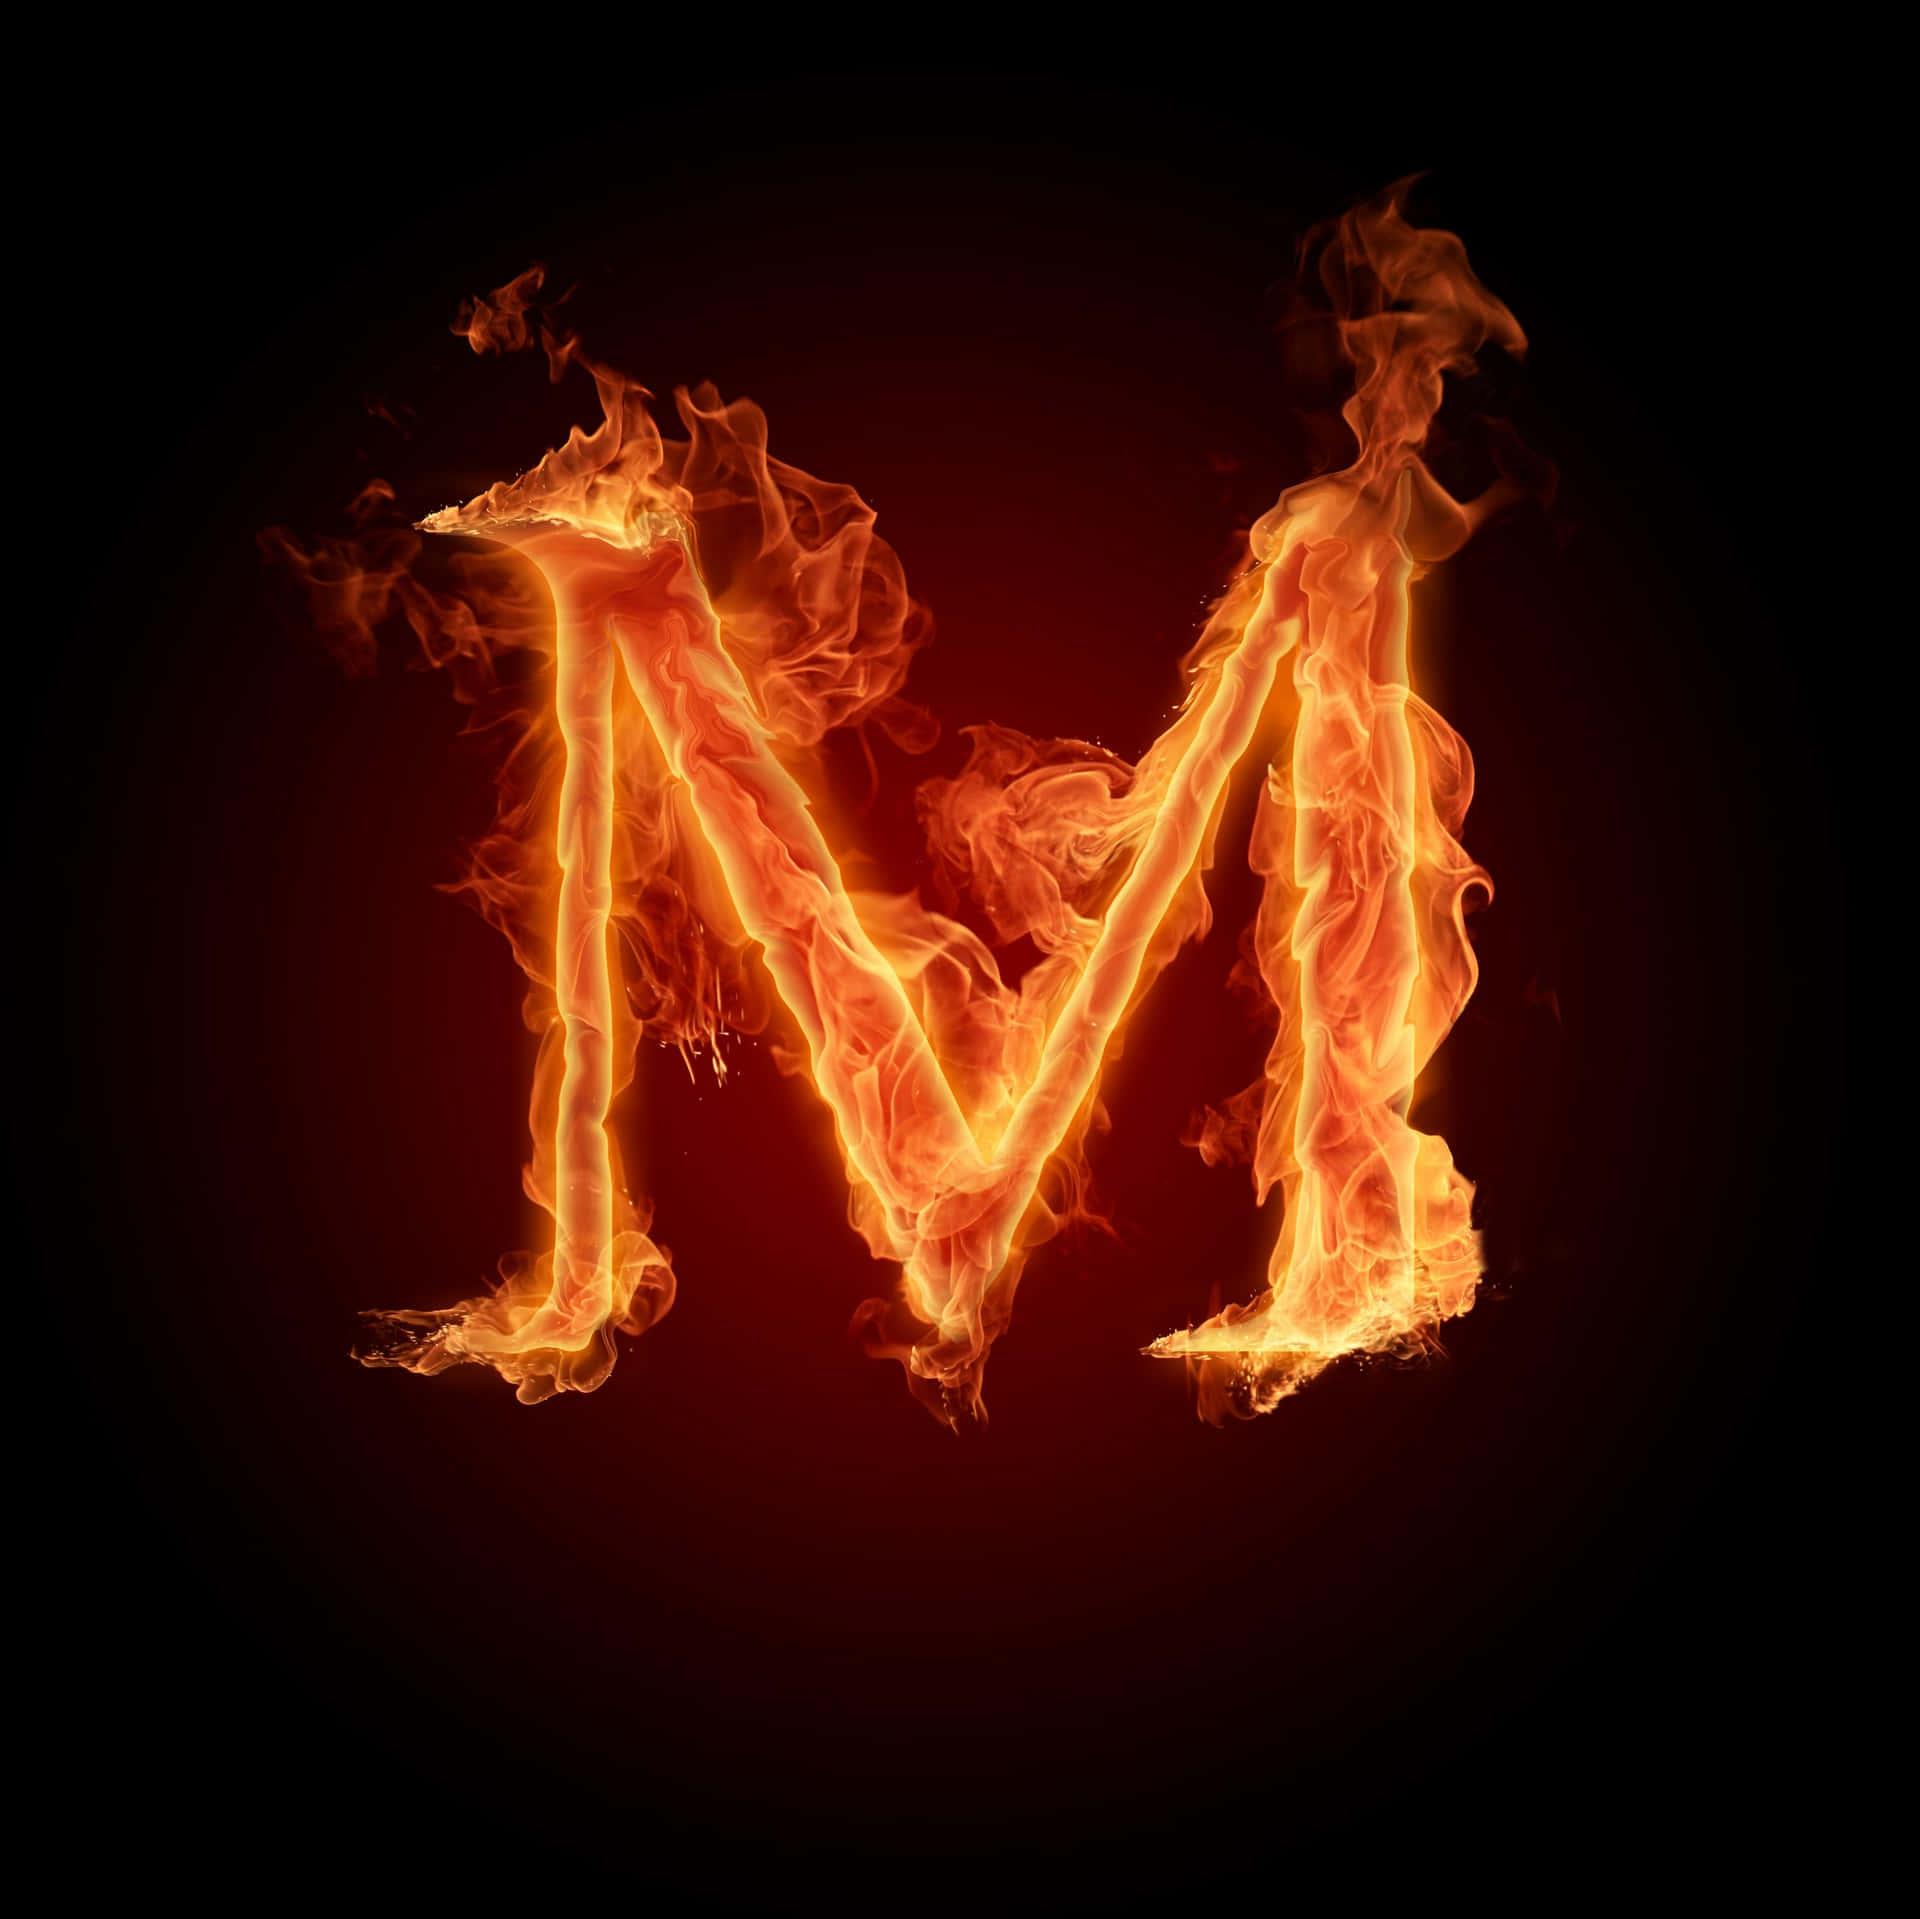 A Letter M In Fire On Black Background Wallpaper